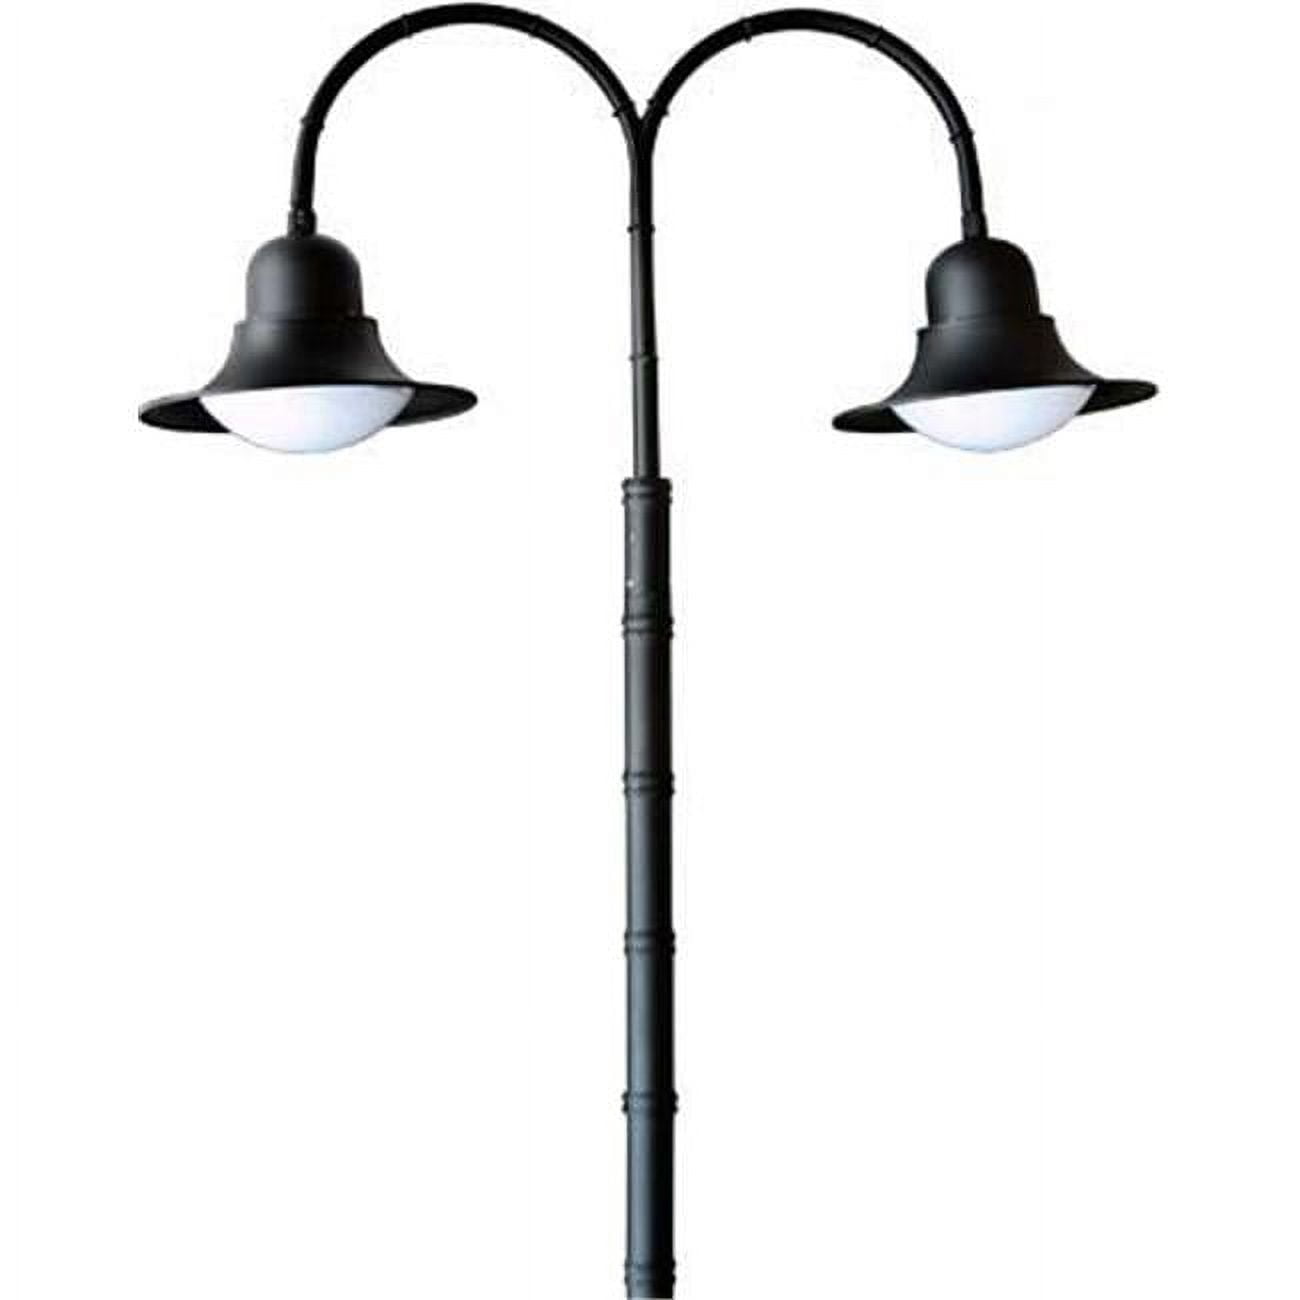 Picture of Dabmar Lighting GM625-B 35W 120V Powder Coated Cast Aluminum Post Top Light Fixture with 2x Metal Halide Lamp, Black